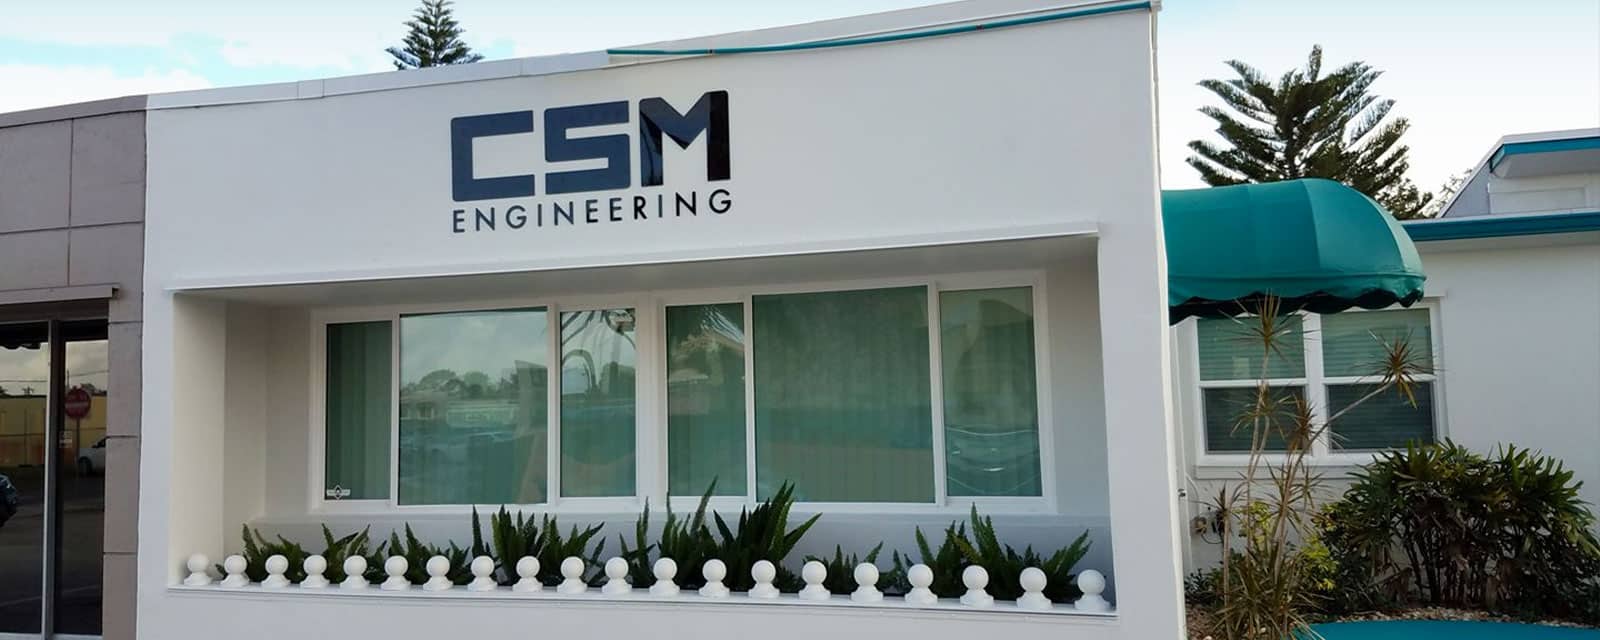 about us csm engineering in stuart fl